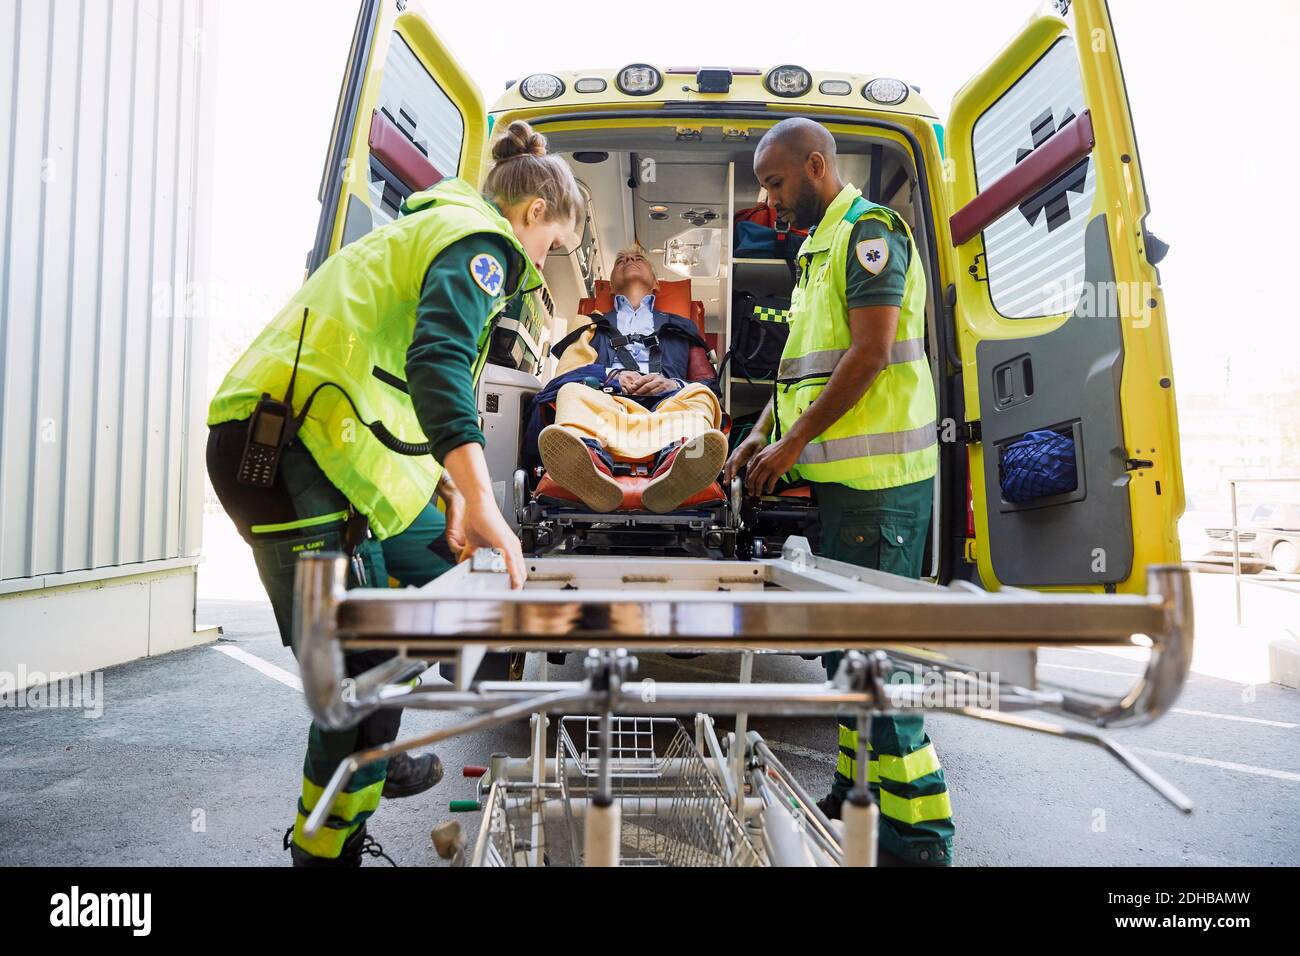 Healthcare workers pulling mature patient from ambulance on hospital gurney Stock Photo